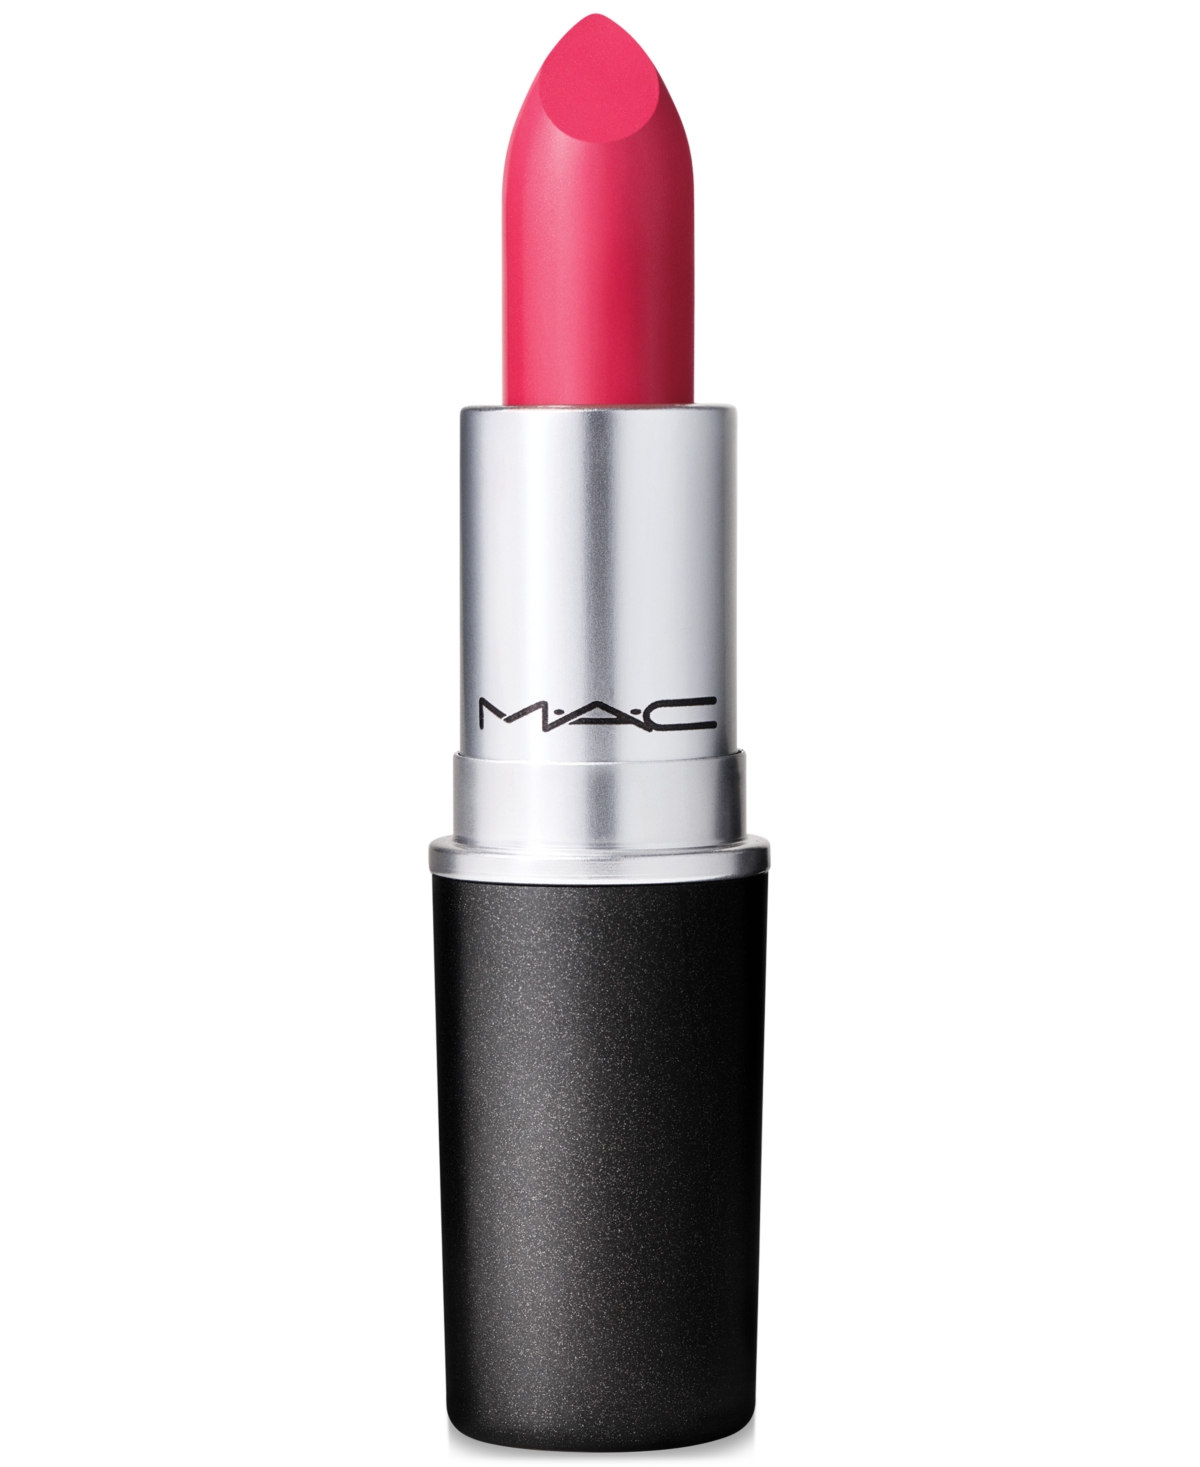 Mac Re-think Pink Amplified Lipstick In So You (midfone Pink With Blue Undertone